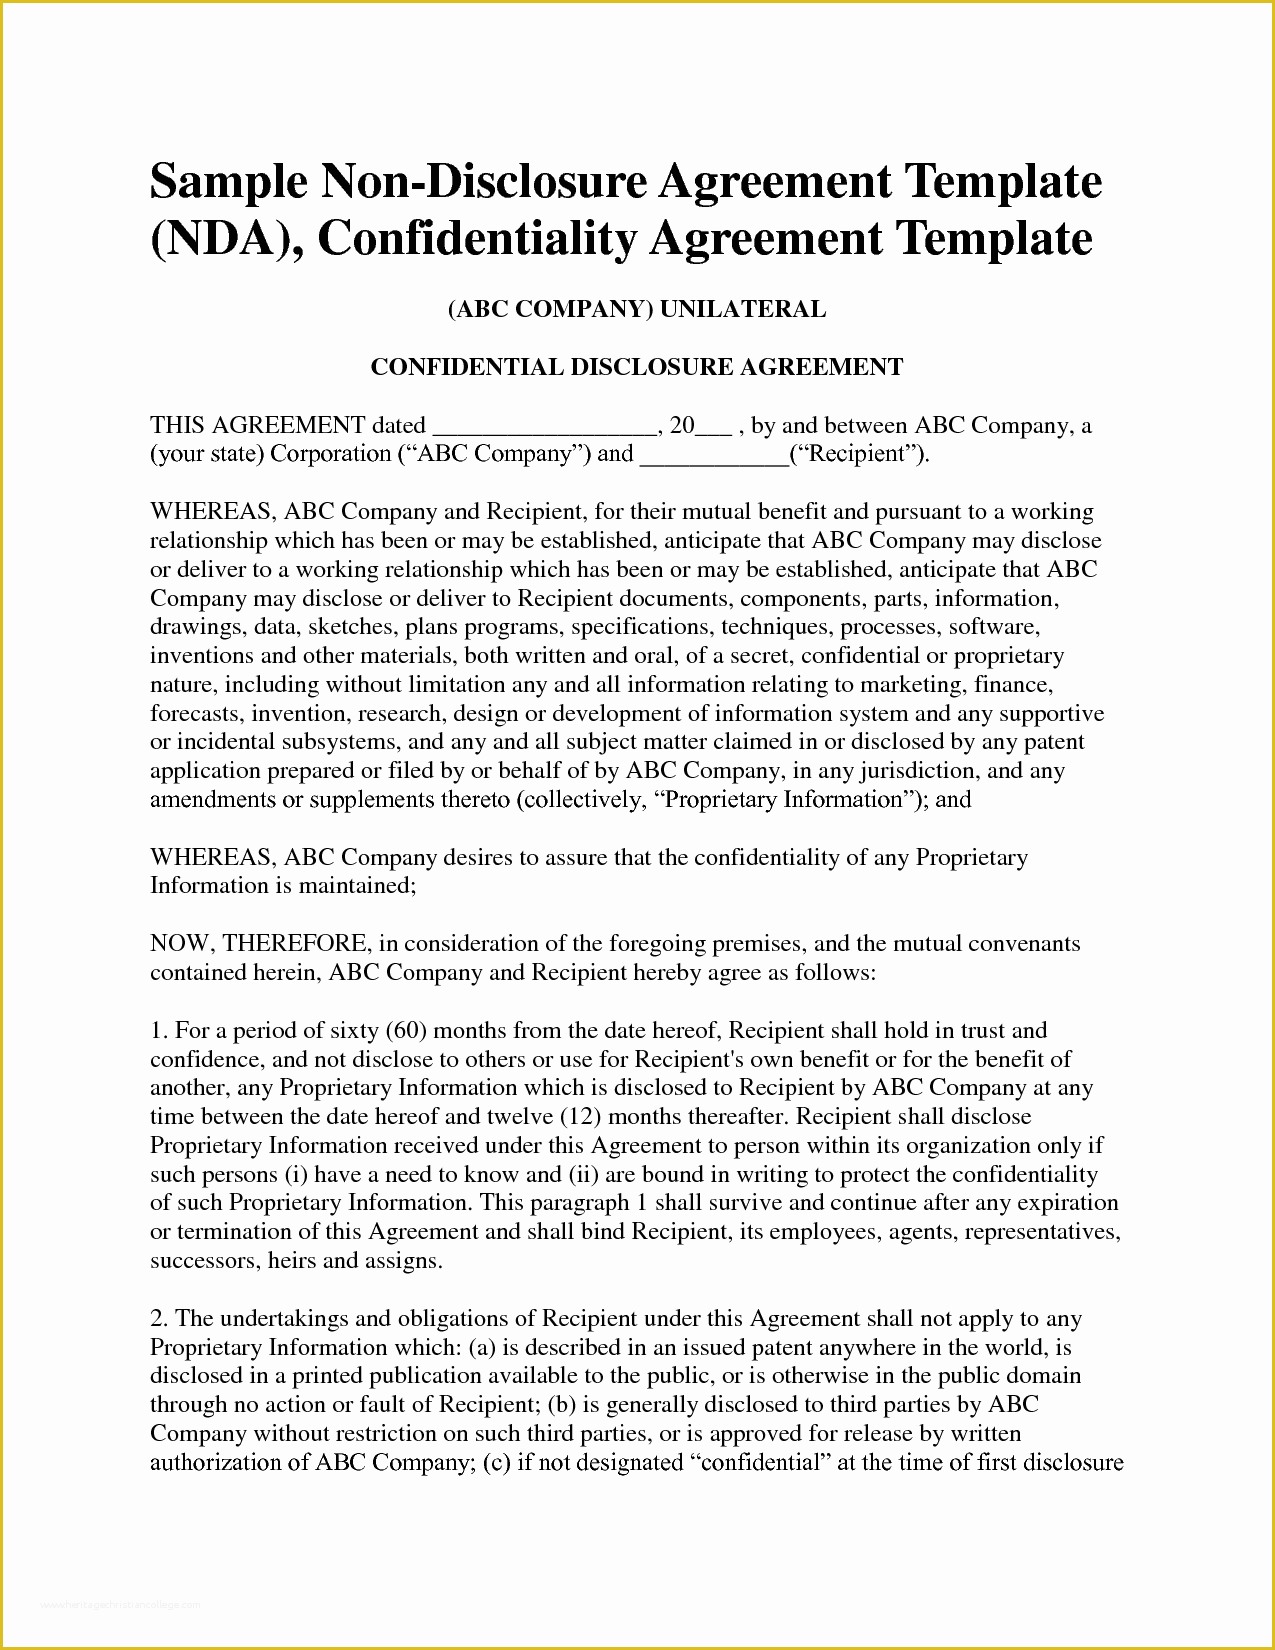 Confidentiality Agreement Template Free Of Non Disclosure Agreement Template Free Sample Nda Template